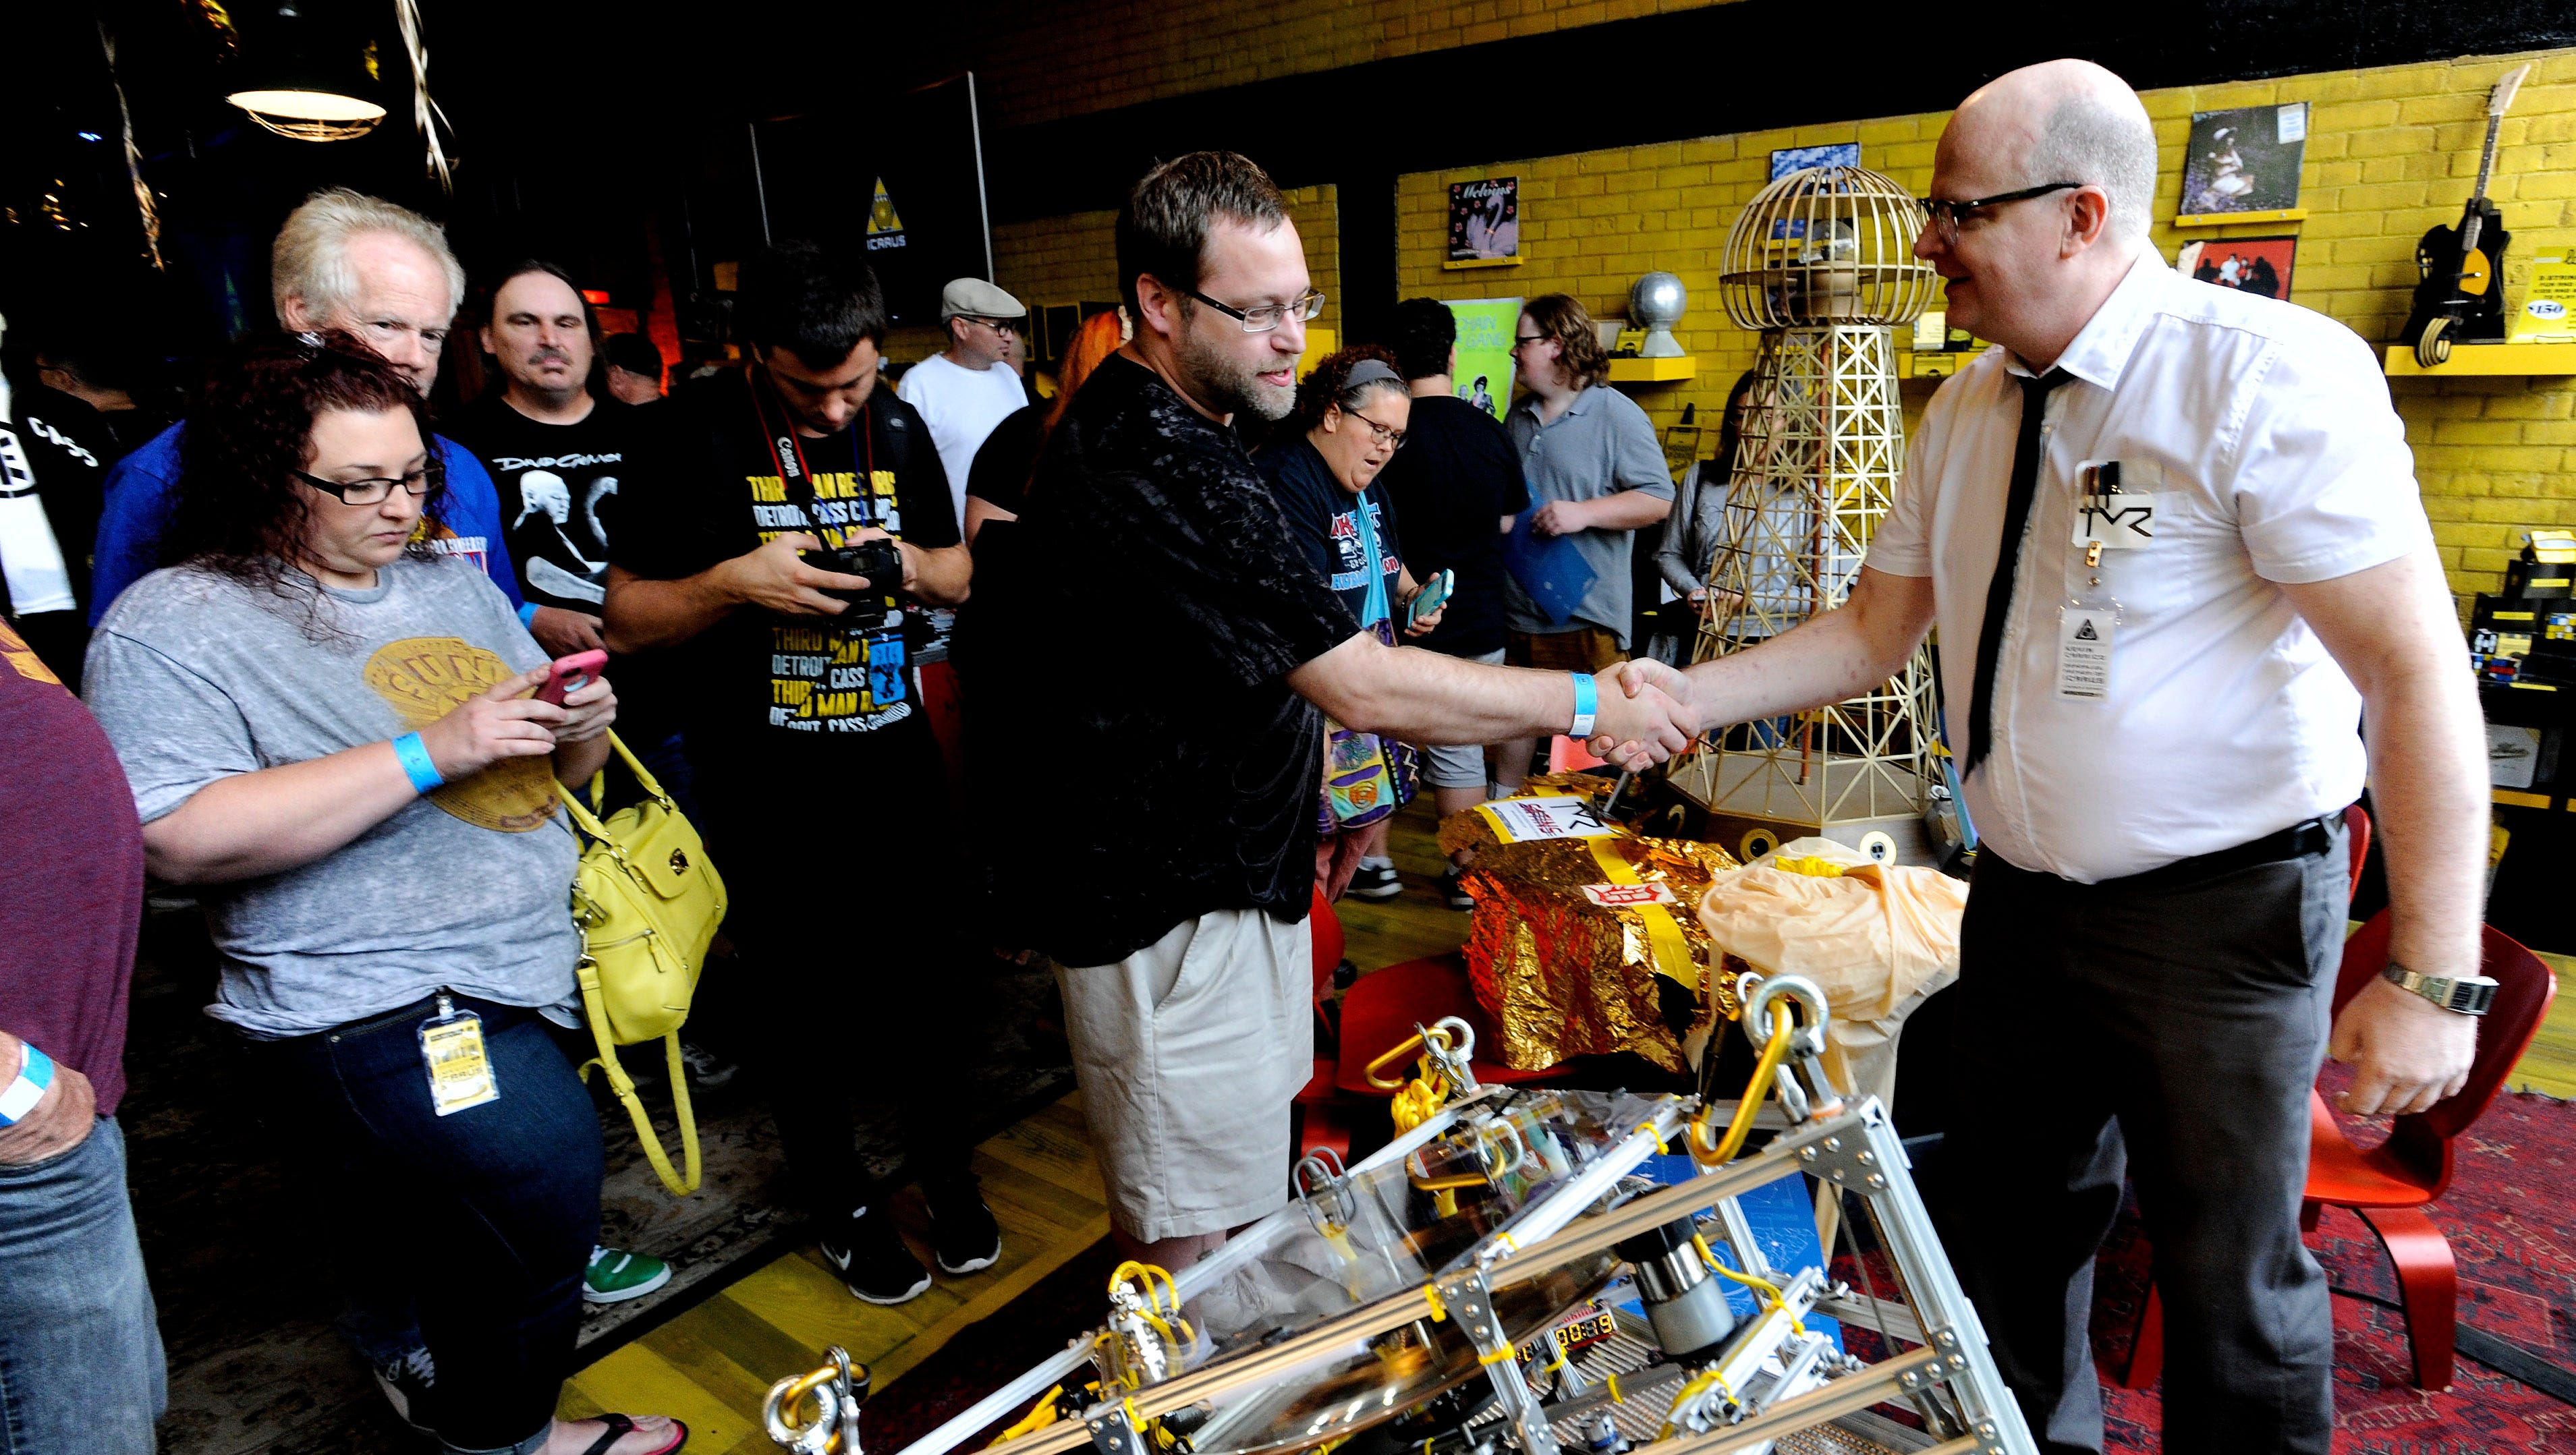 Darrell Wright, left, 40, of Fenton, shakes hands with Kevin Carrico, of Royal Oak, the special projects engineer who built the Icarus Craft. 
Fans attended a watch party at Third Man Records in Detroit for the first phonograph record to be played in space on Saturday, July 30, 2016.